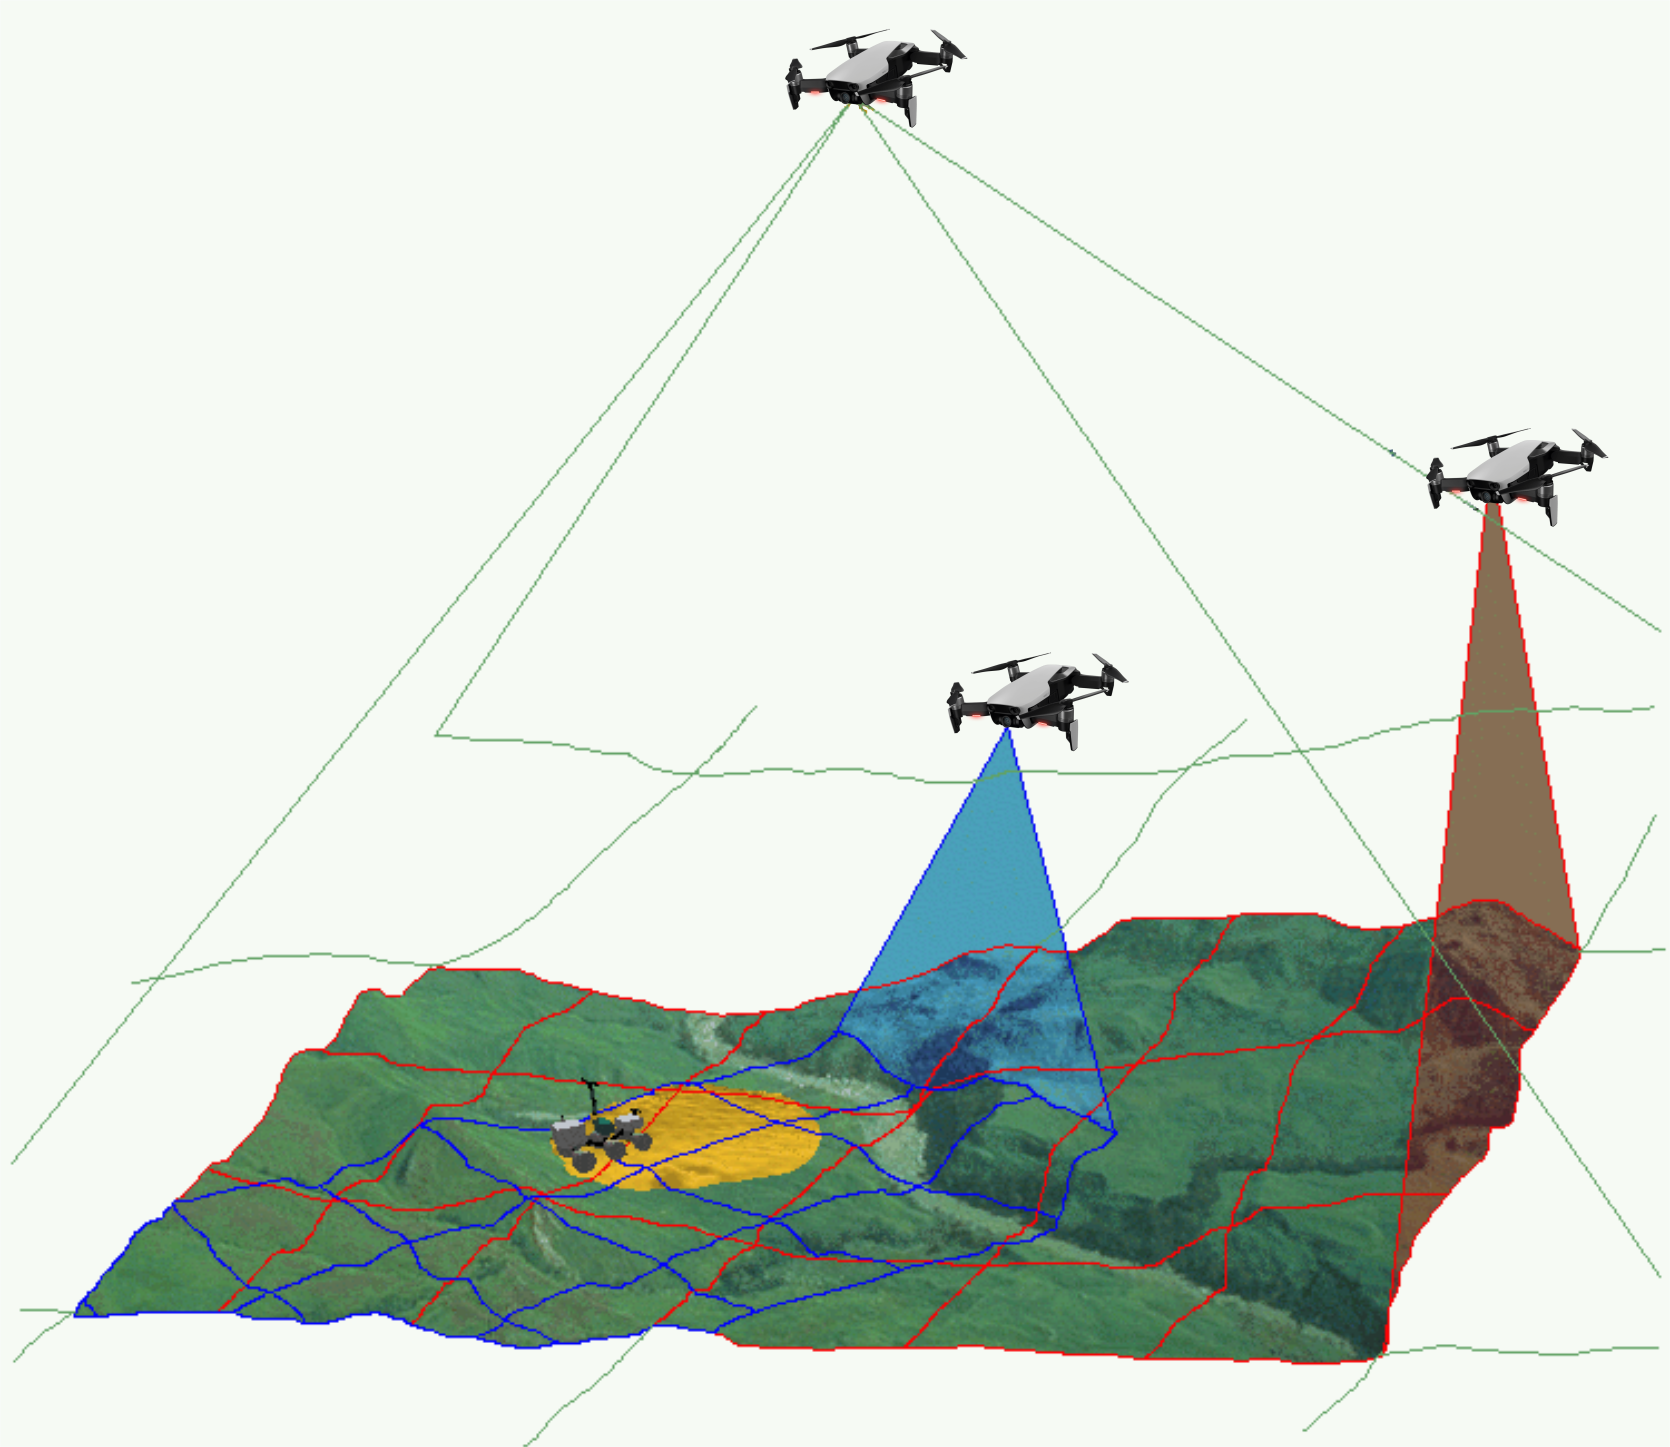 Environment monitoring with a collaborative robotic system composed by aerial and ground robots.